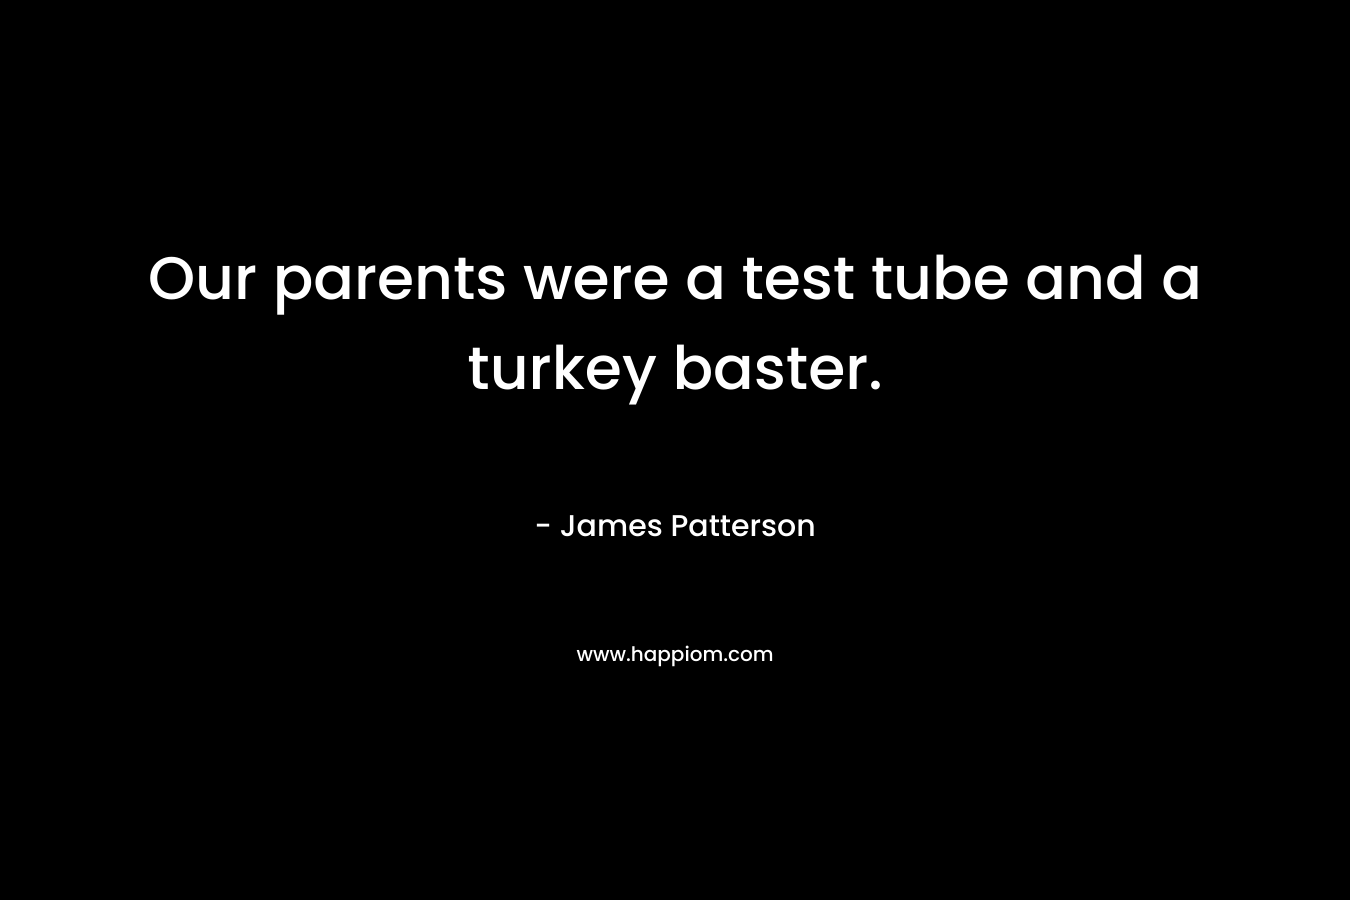 Our parents were a test tube and a turkey baster.